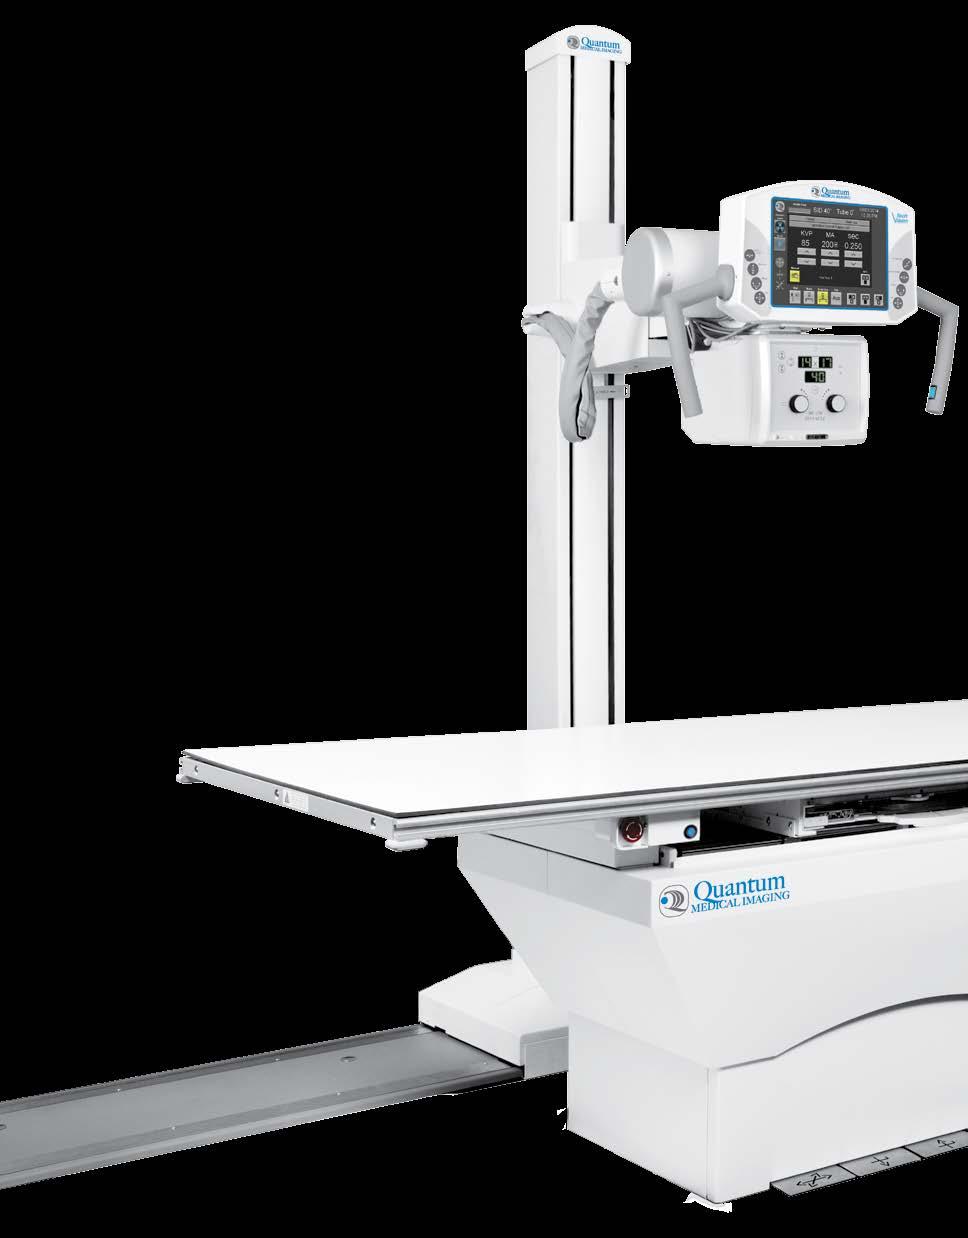 FLOOR-MOUNTED SYSTEMS A Quantum Q-Rad-DIGITAL Floor-mounted system is the ideal choice for busy imaging centers, orthopaedic